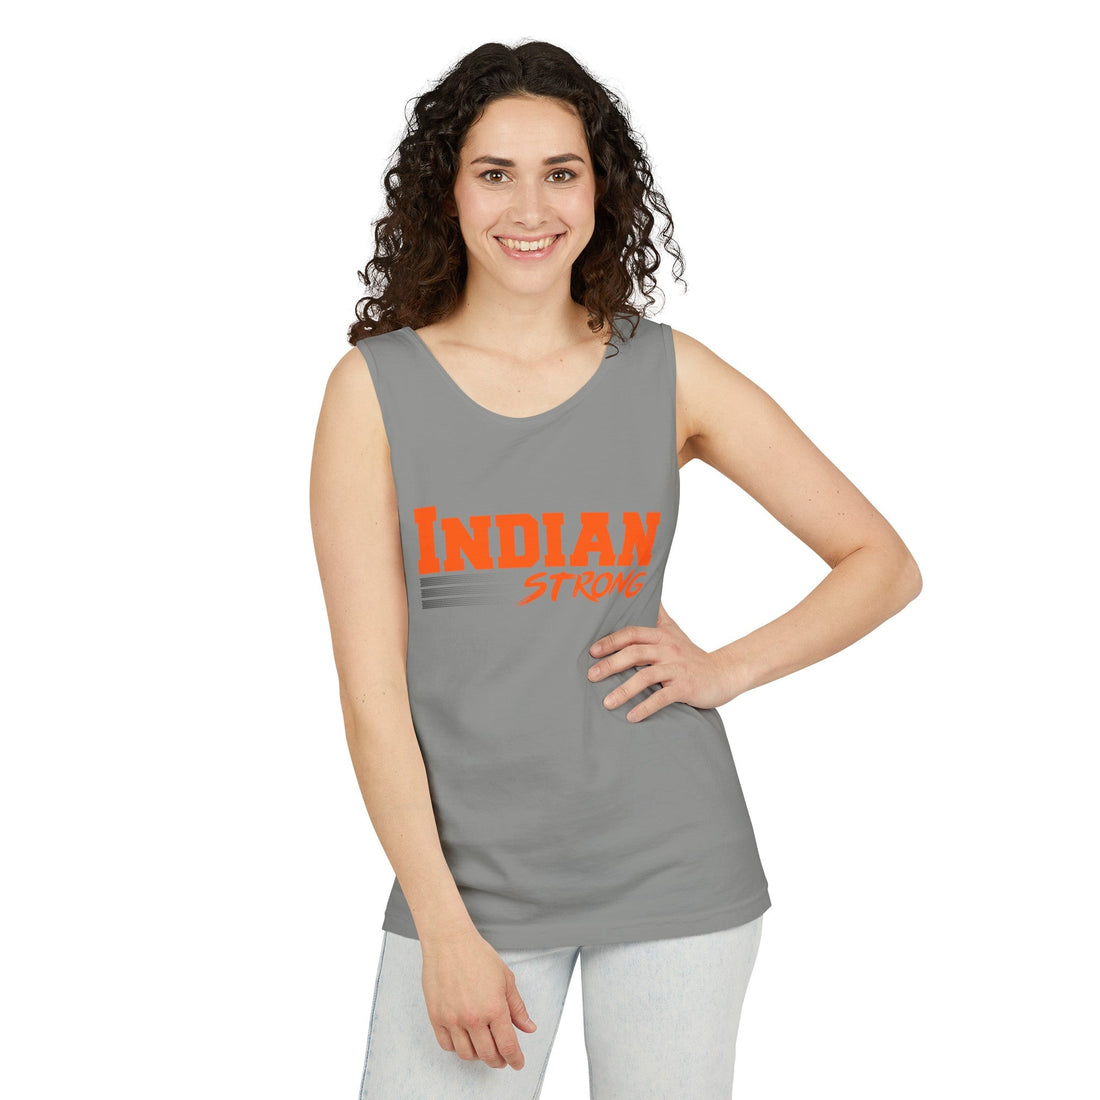 Indian Strong Unisex Garment - Dyed Tank Top - Tank Top - Positively Sassy - Indian Strong Unisex Garment - Dyed Tank Top